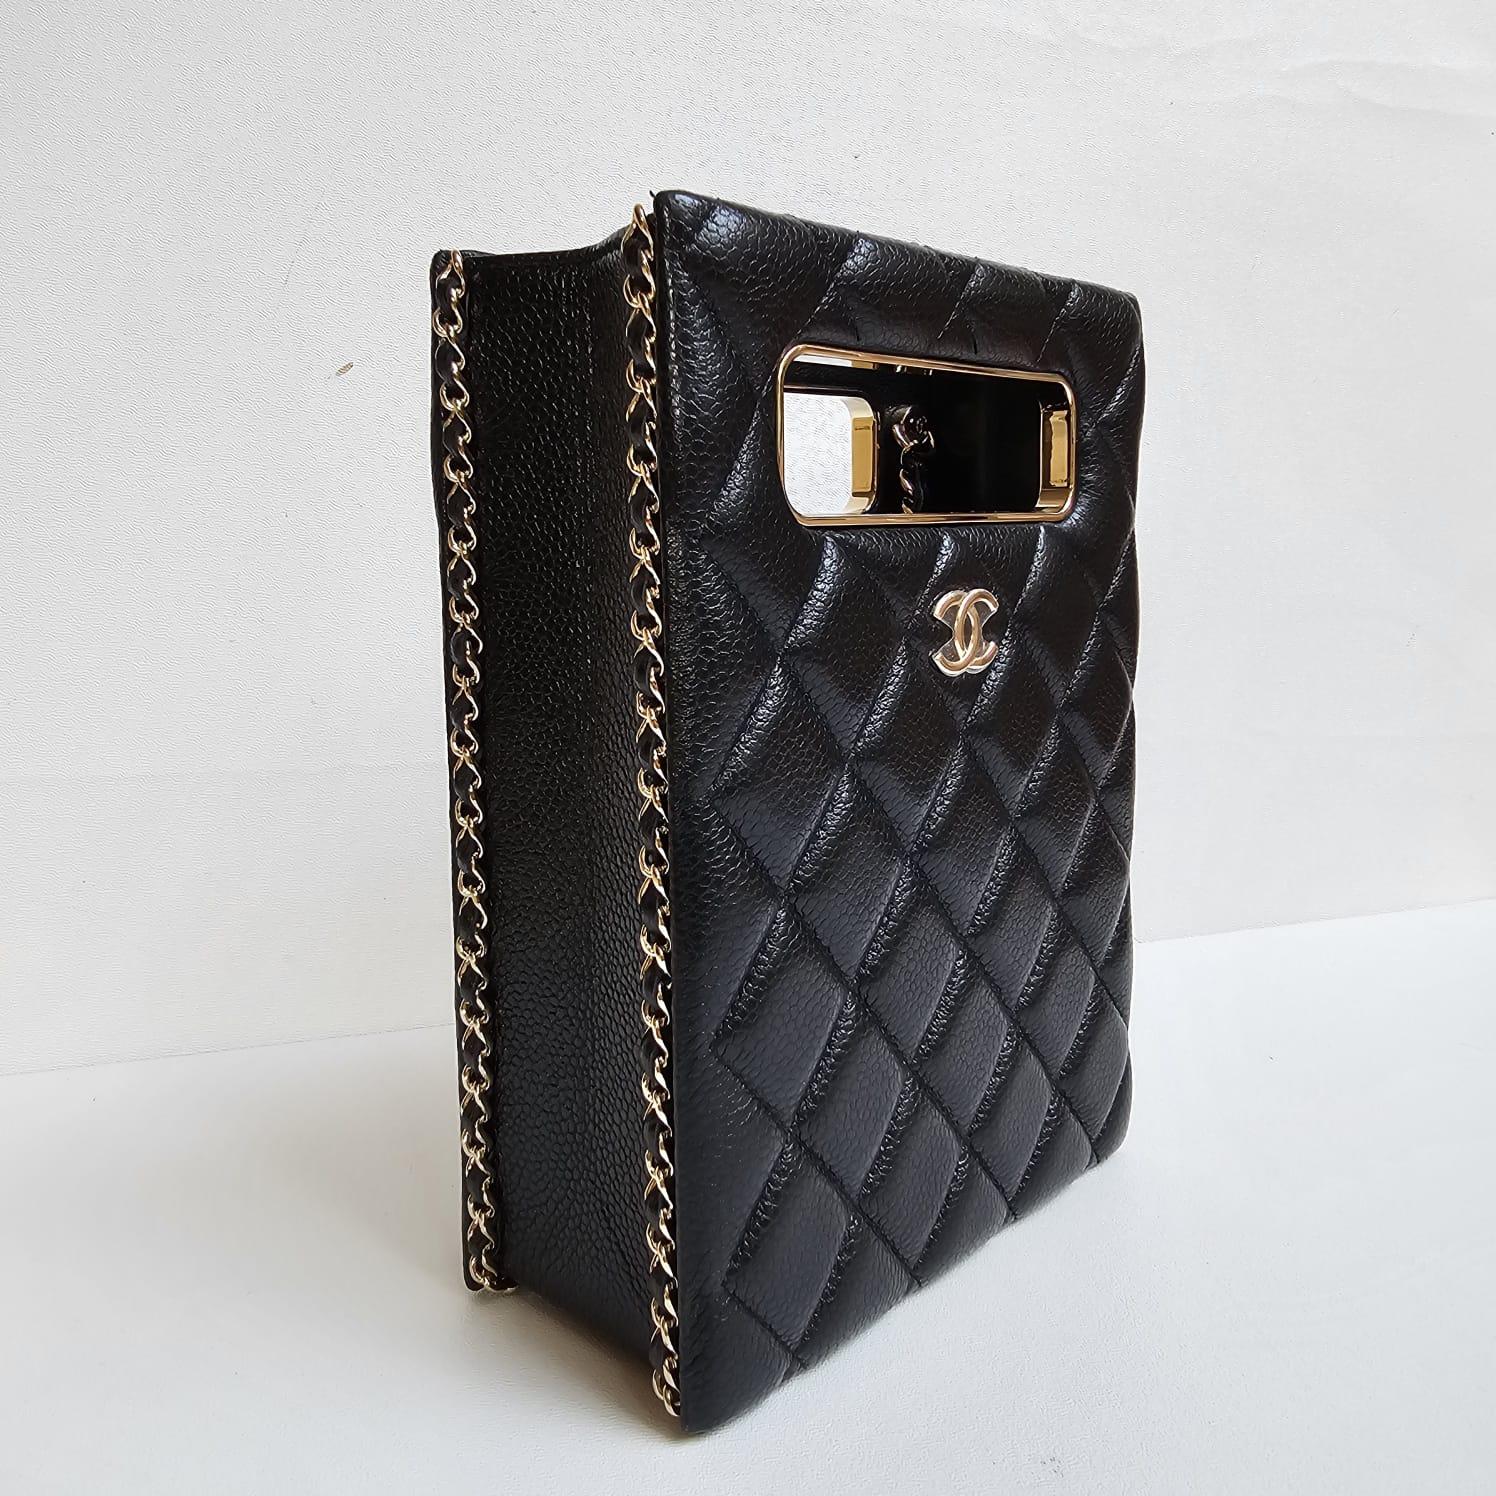 Chanel Black Caviar Quilted Evening Box Bag For Sale 1